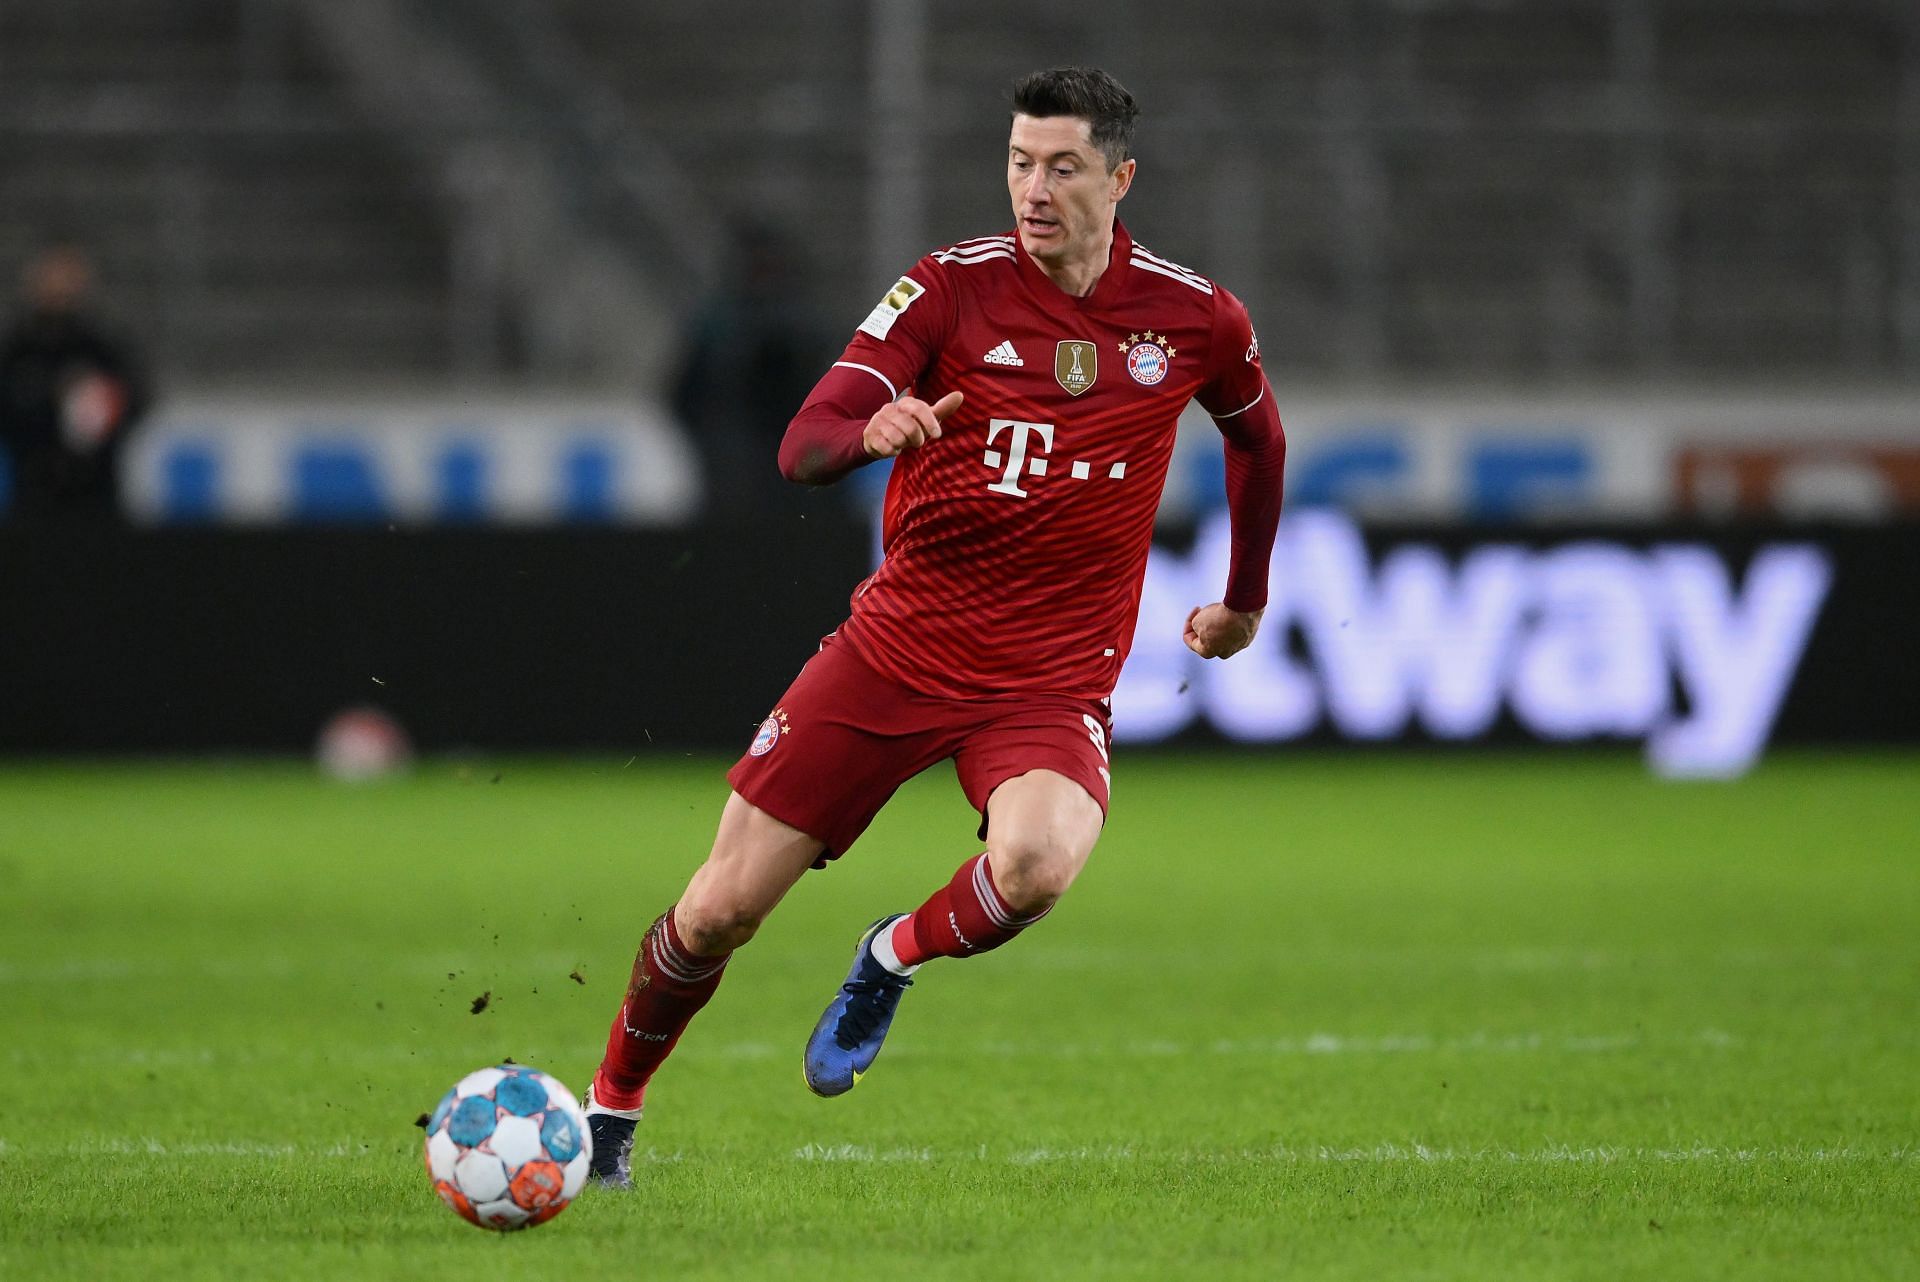 Lewandowski is playing in a league of his own!